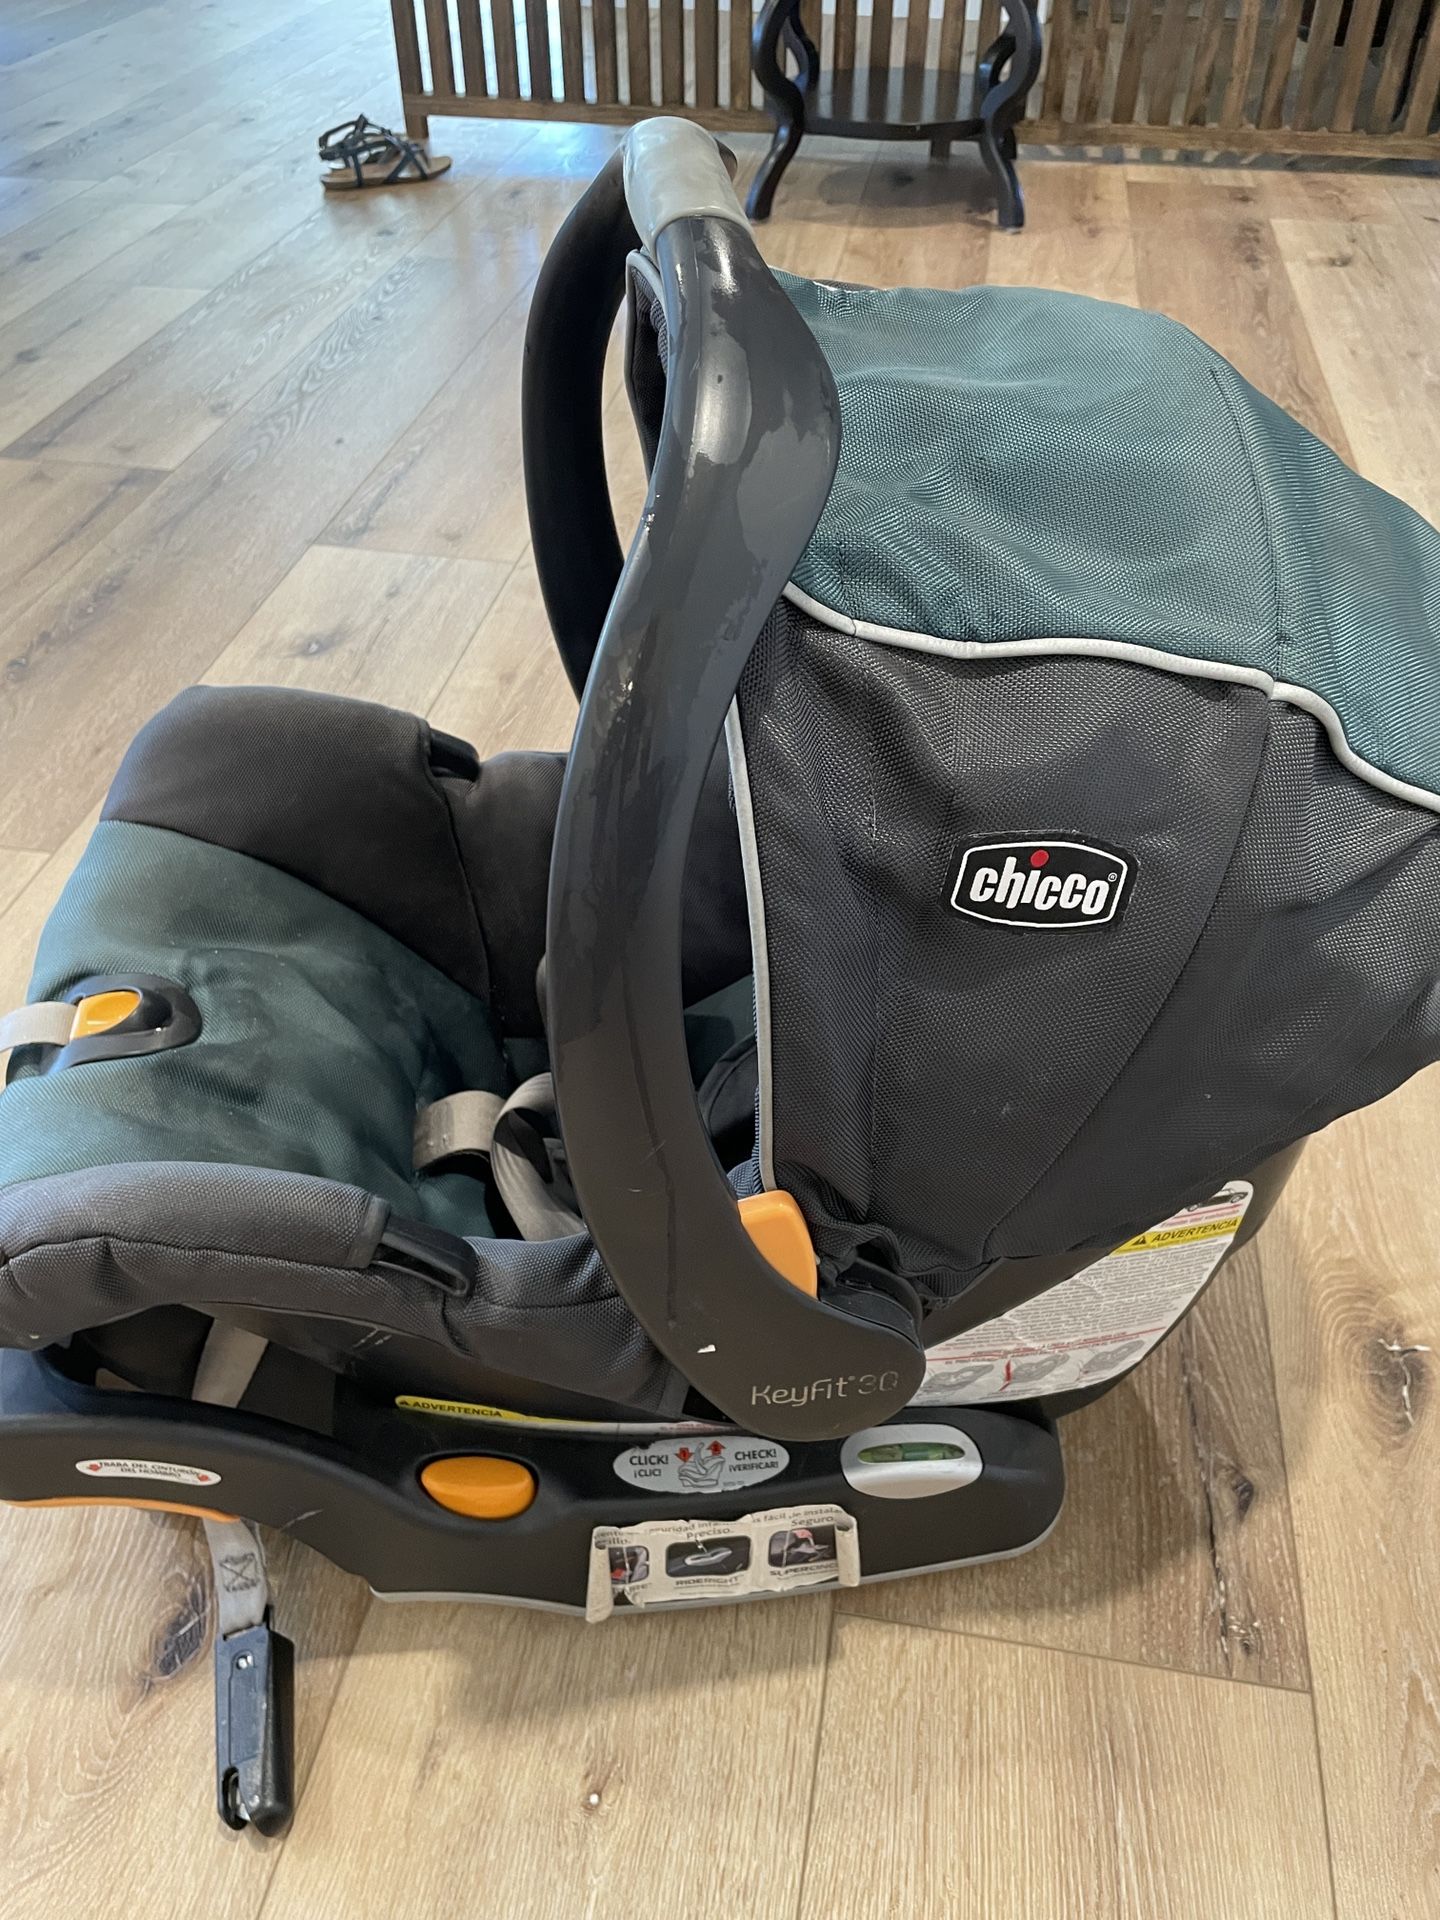 Free Chicco Car Seat